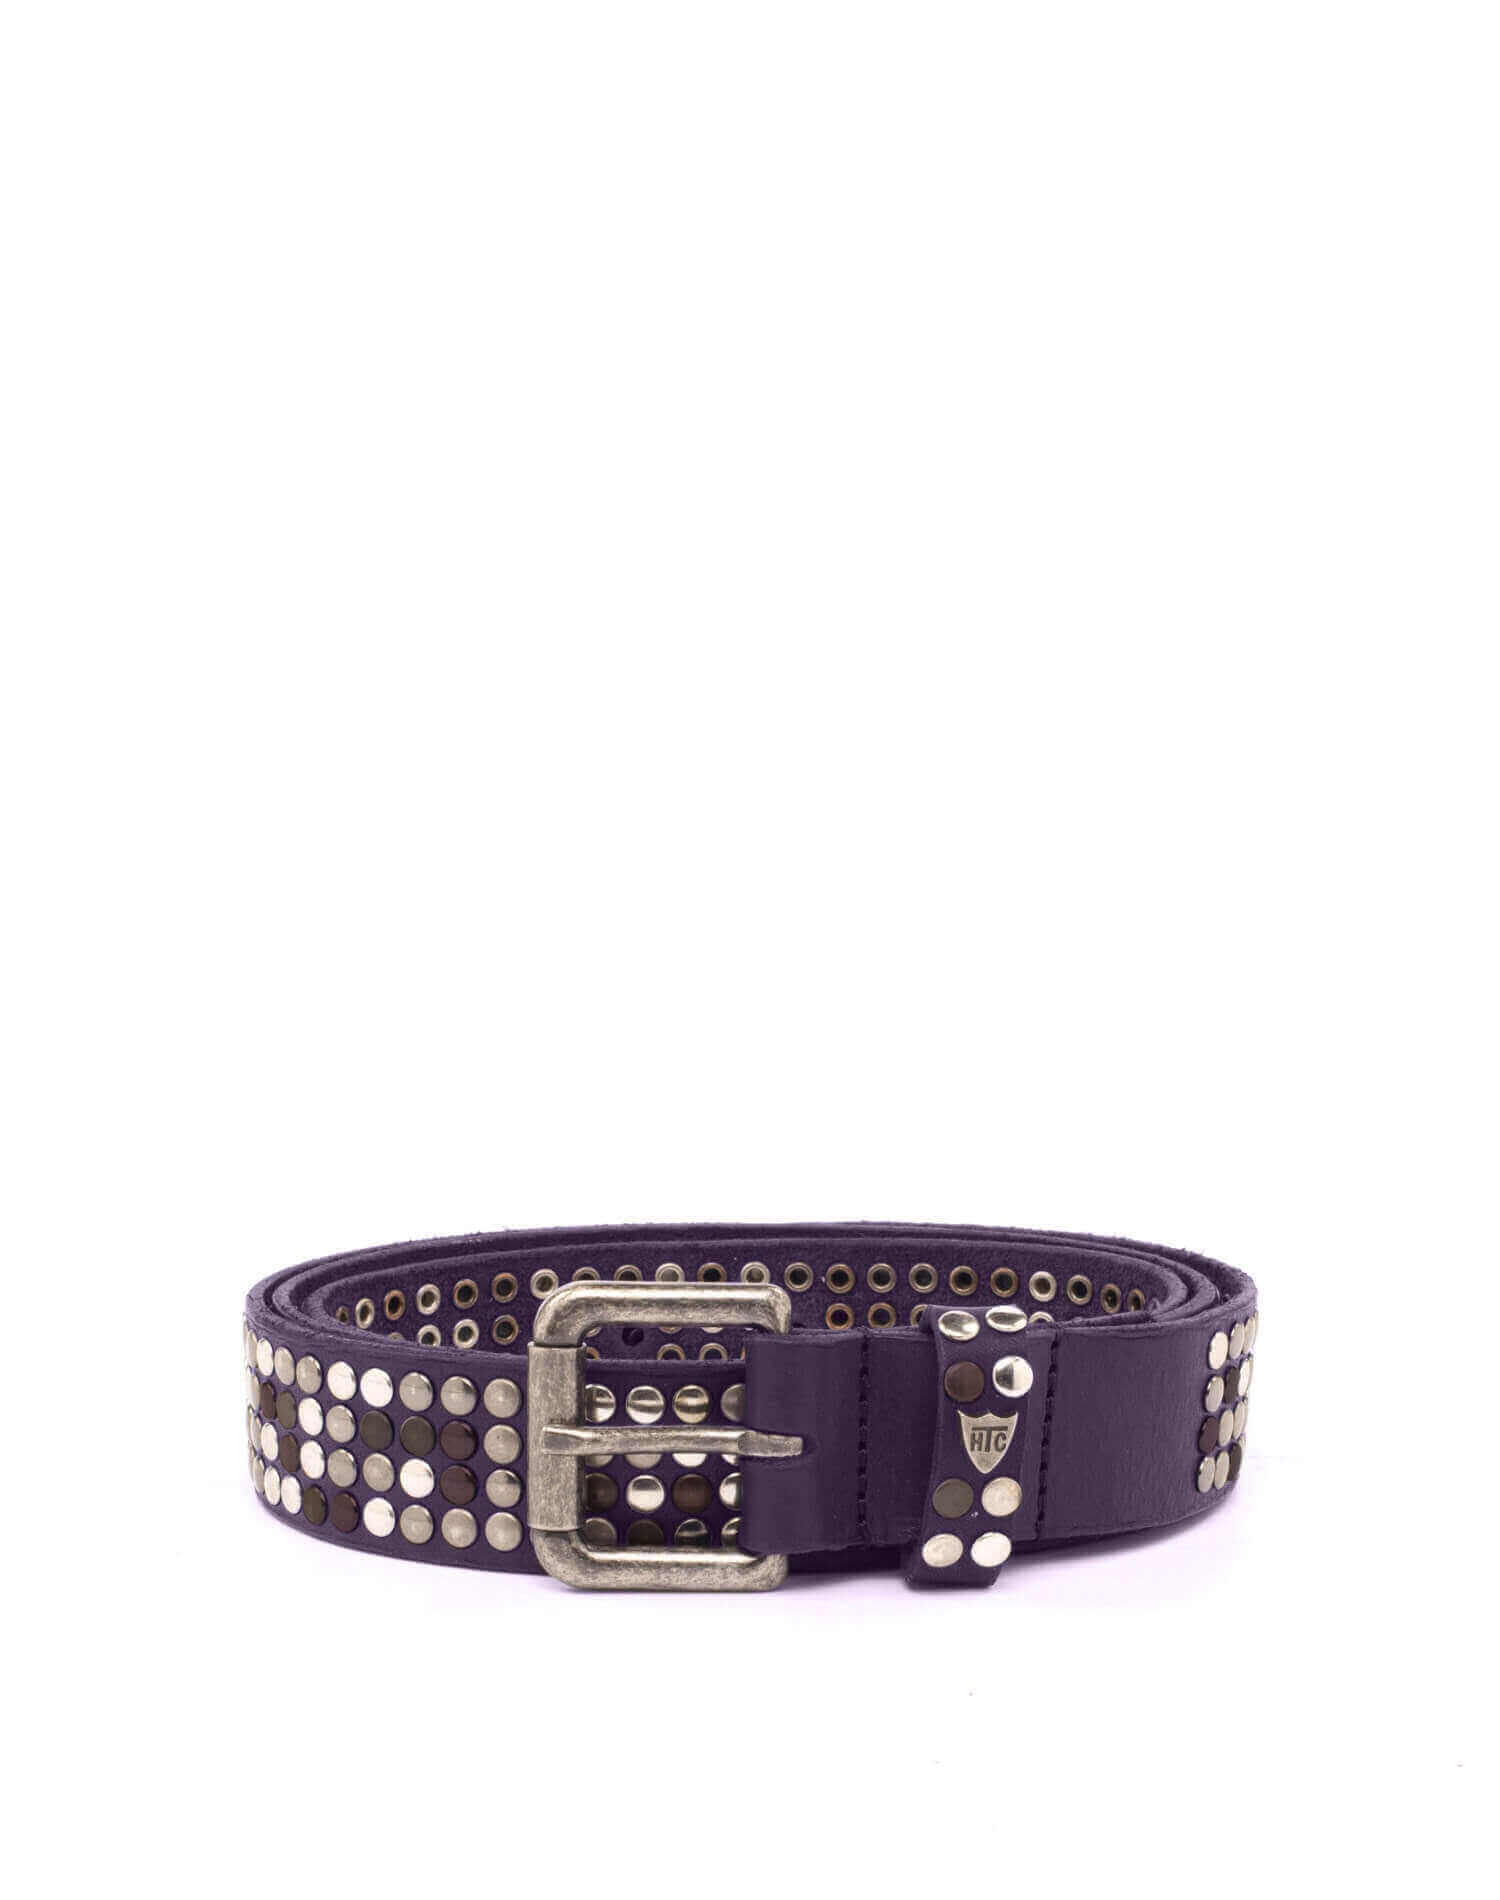 4.000 STUDS VARNISH BELT Violet leather belt with studs, brass buckle, studded zamac belt loop and rivet with HTC logo. Height: 3 cm. Made in Italy. HTC LOS ANGELES